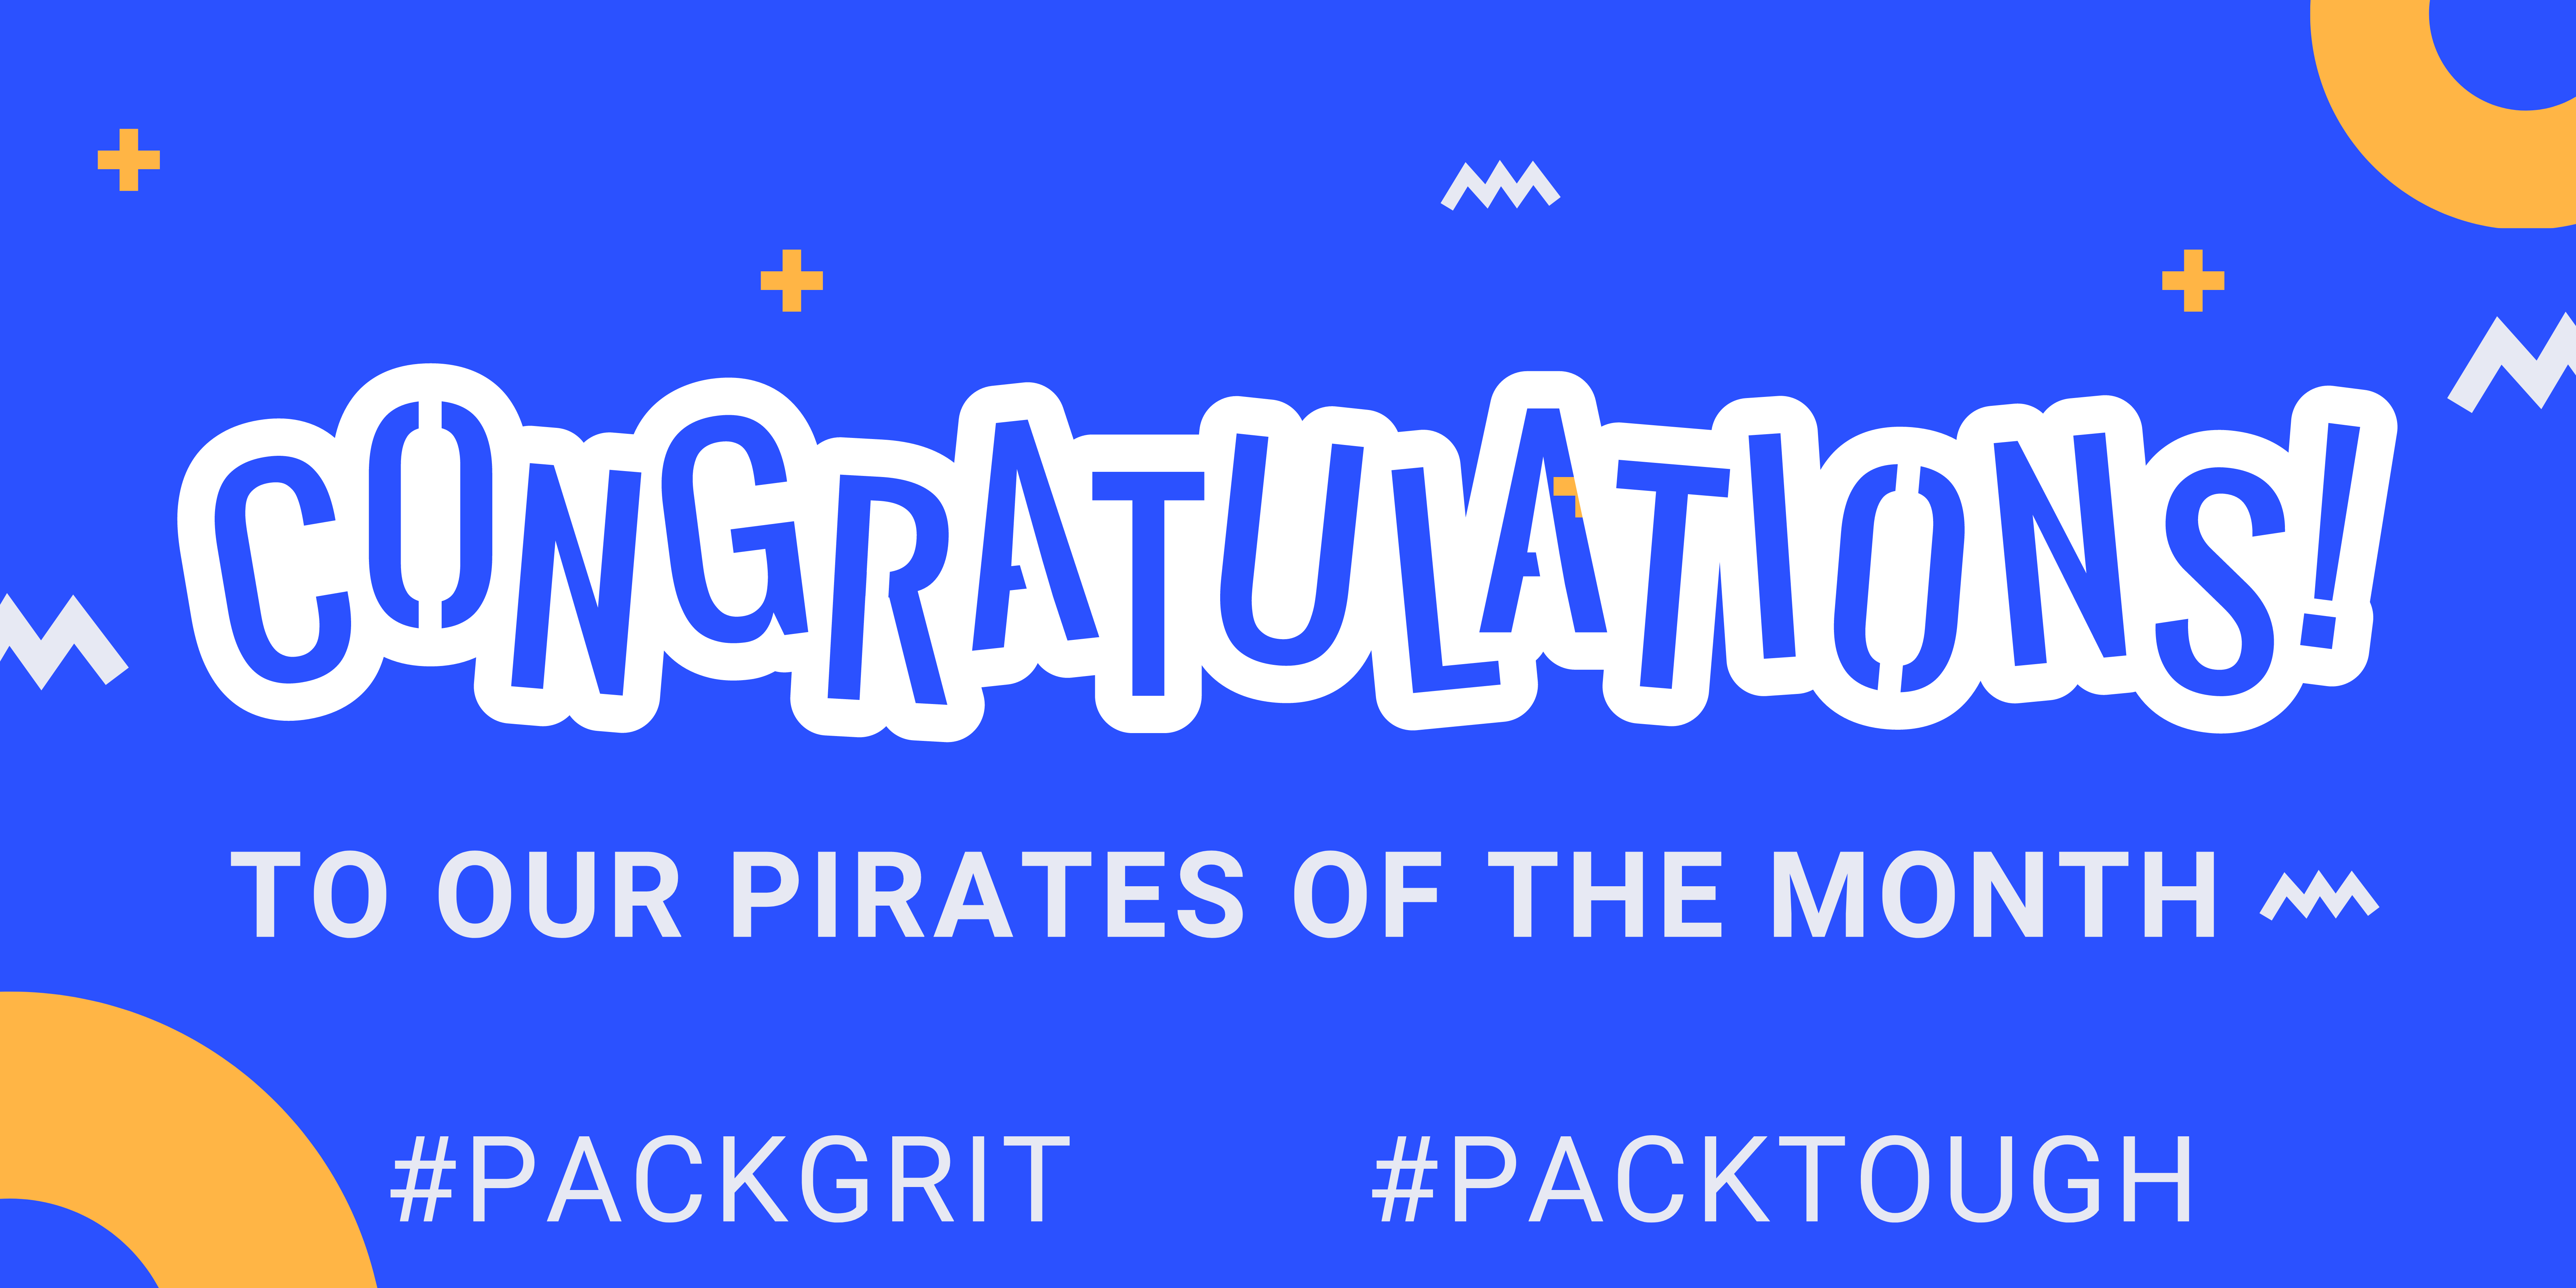 Pirates of the Month